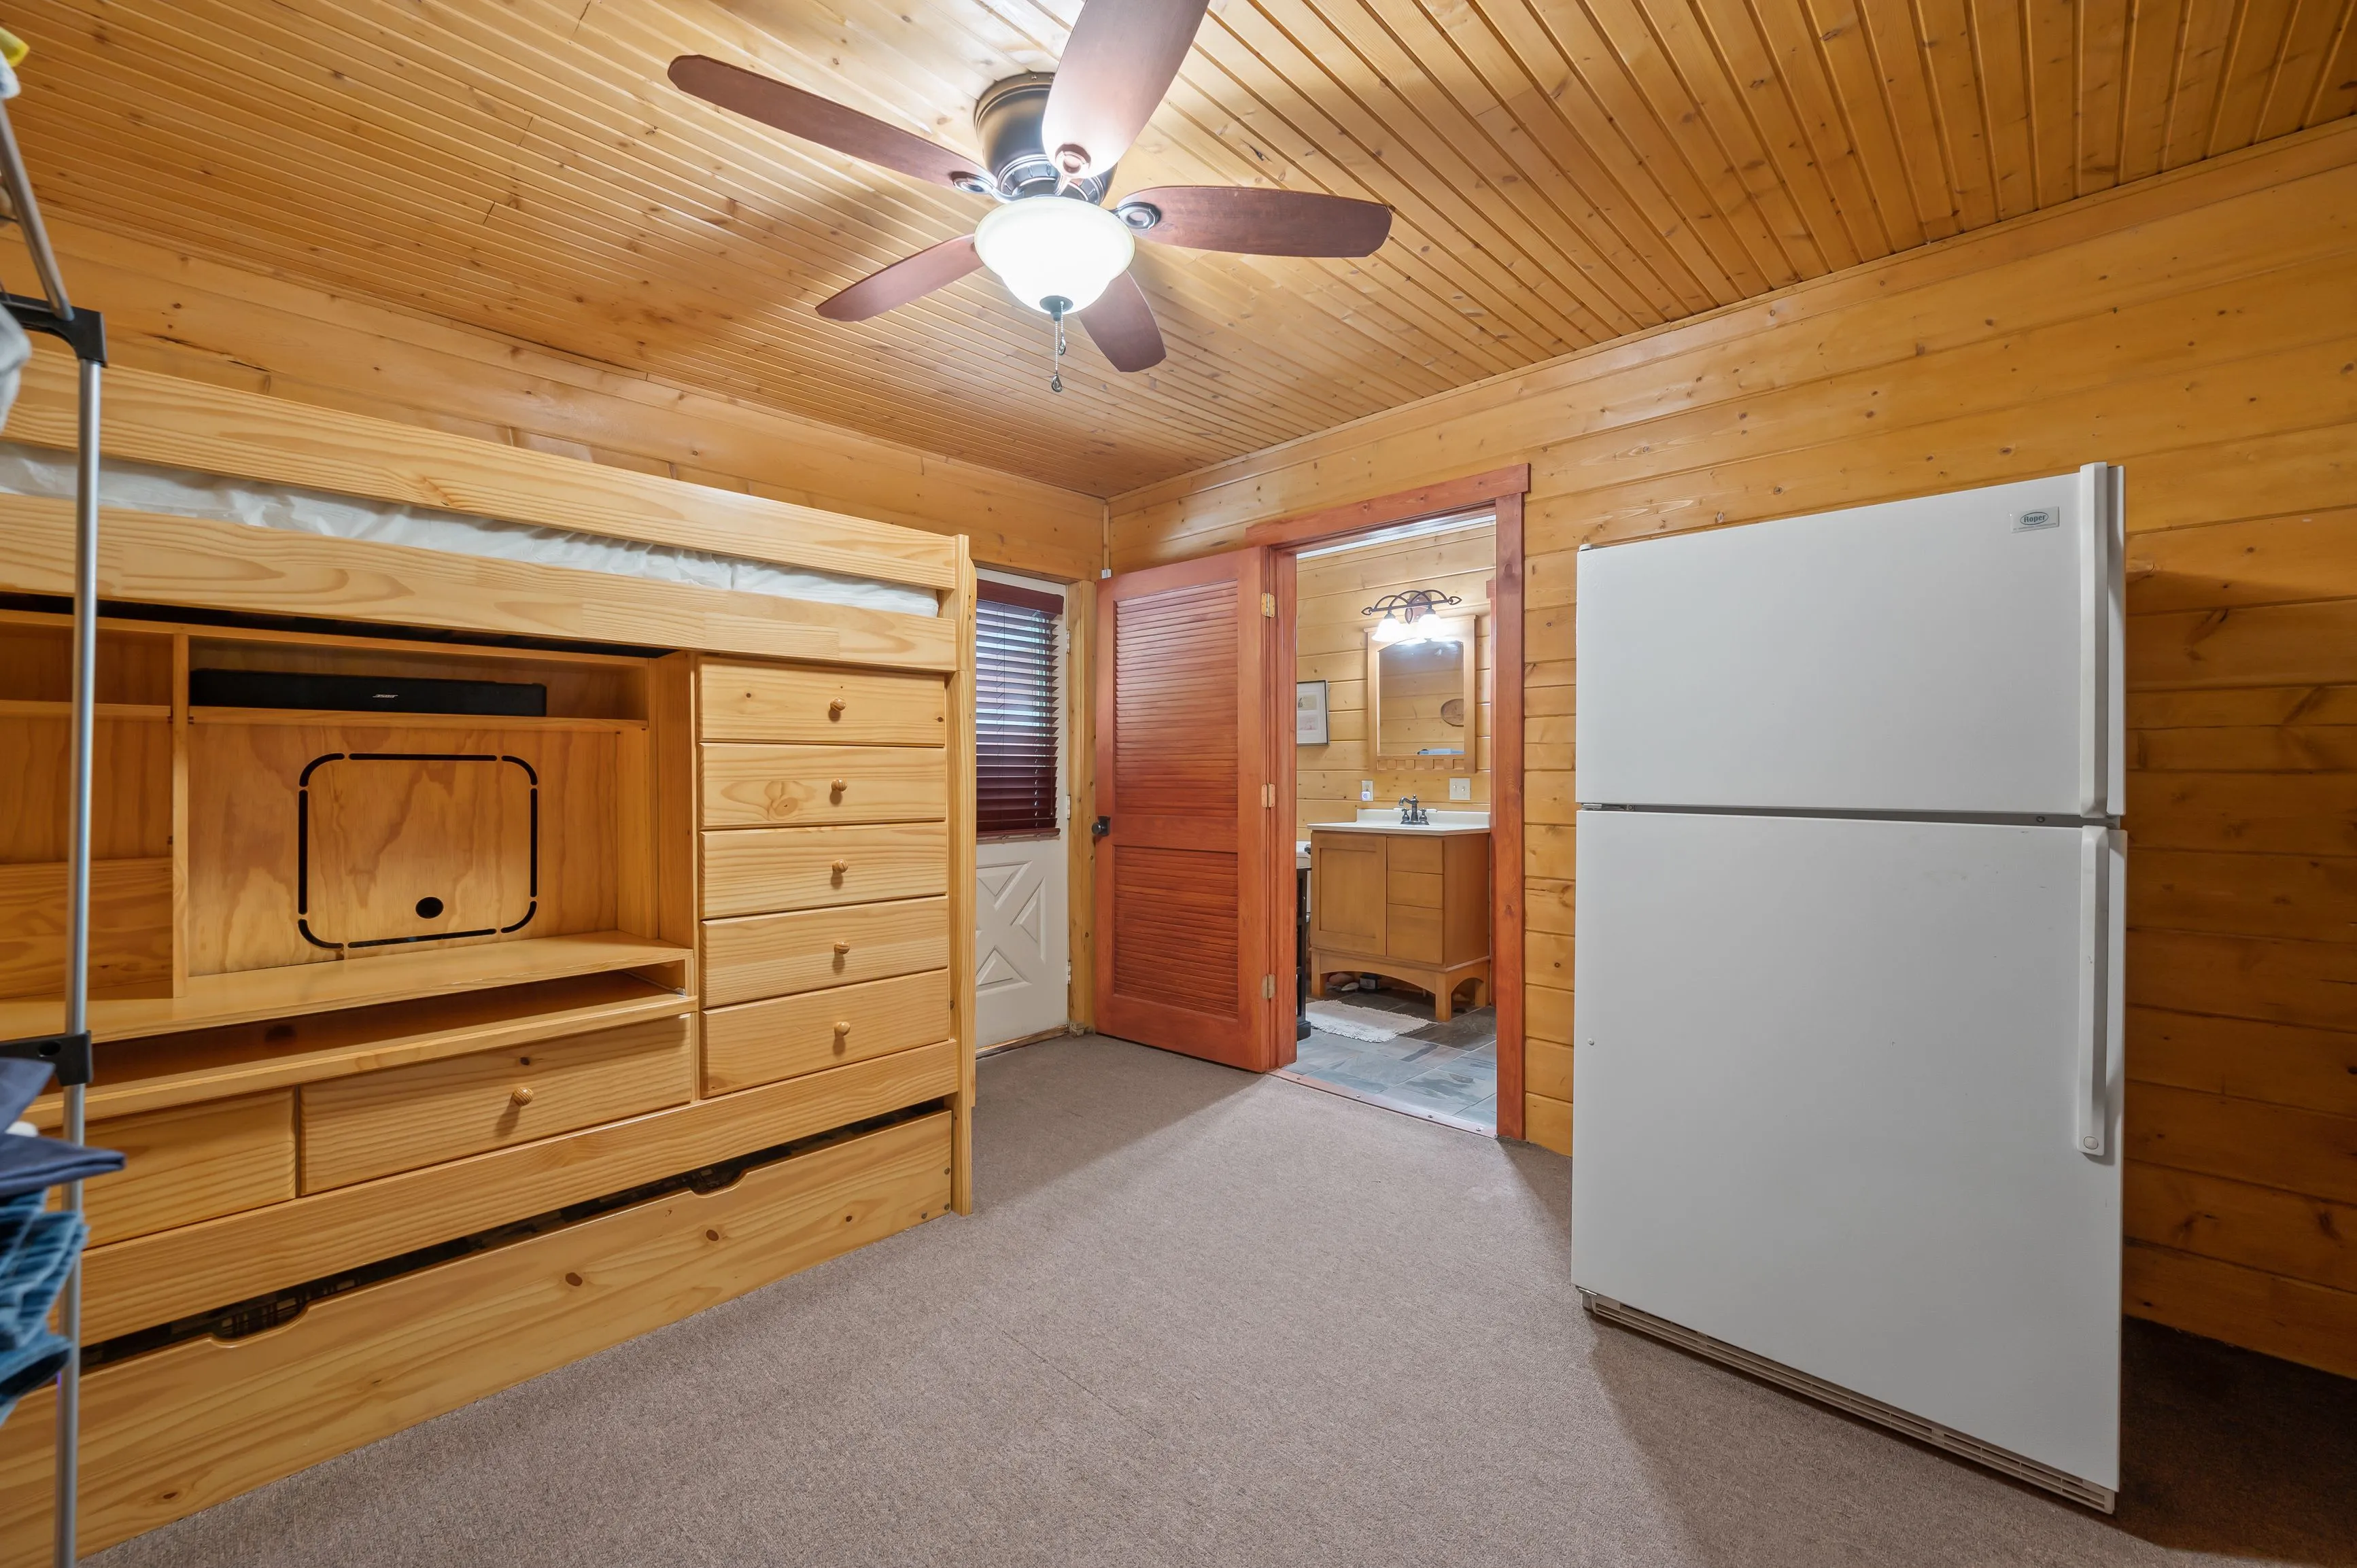 Interior of a wooden cabin room featuring a ceiling fan, built-in wooden cabinetry, a white refrigerator, and a door leading to a bathroom.